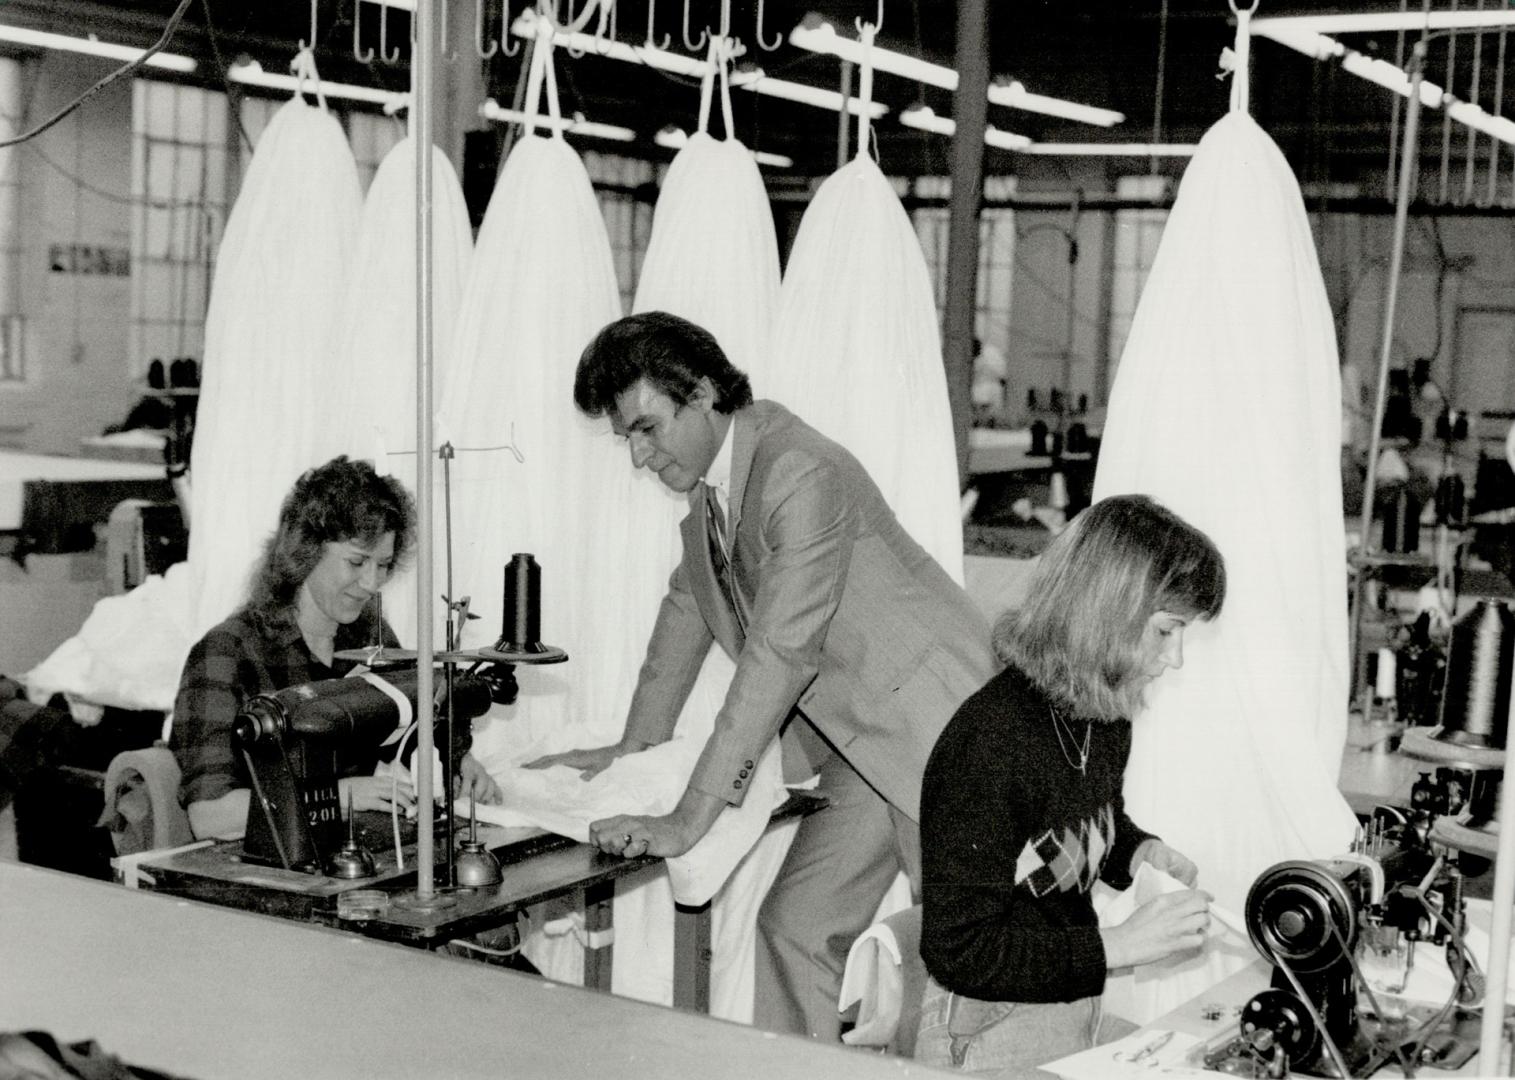 Plunging into work: John Simis likes to look in on the parachute making the Erika Nepp (left) and Diane Schmidt have in hand at Irvin industries Fort Erie plant